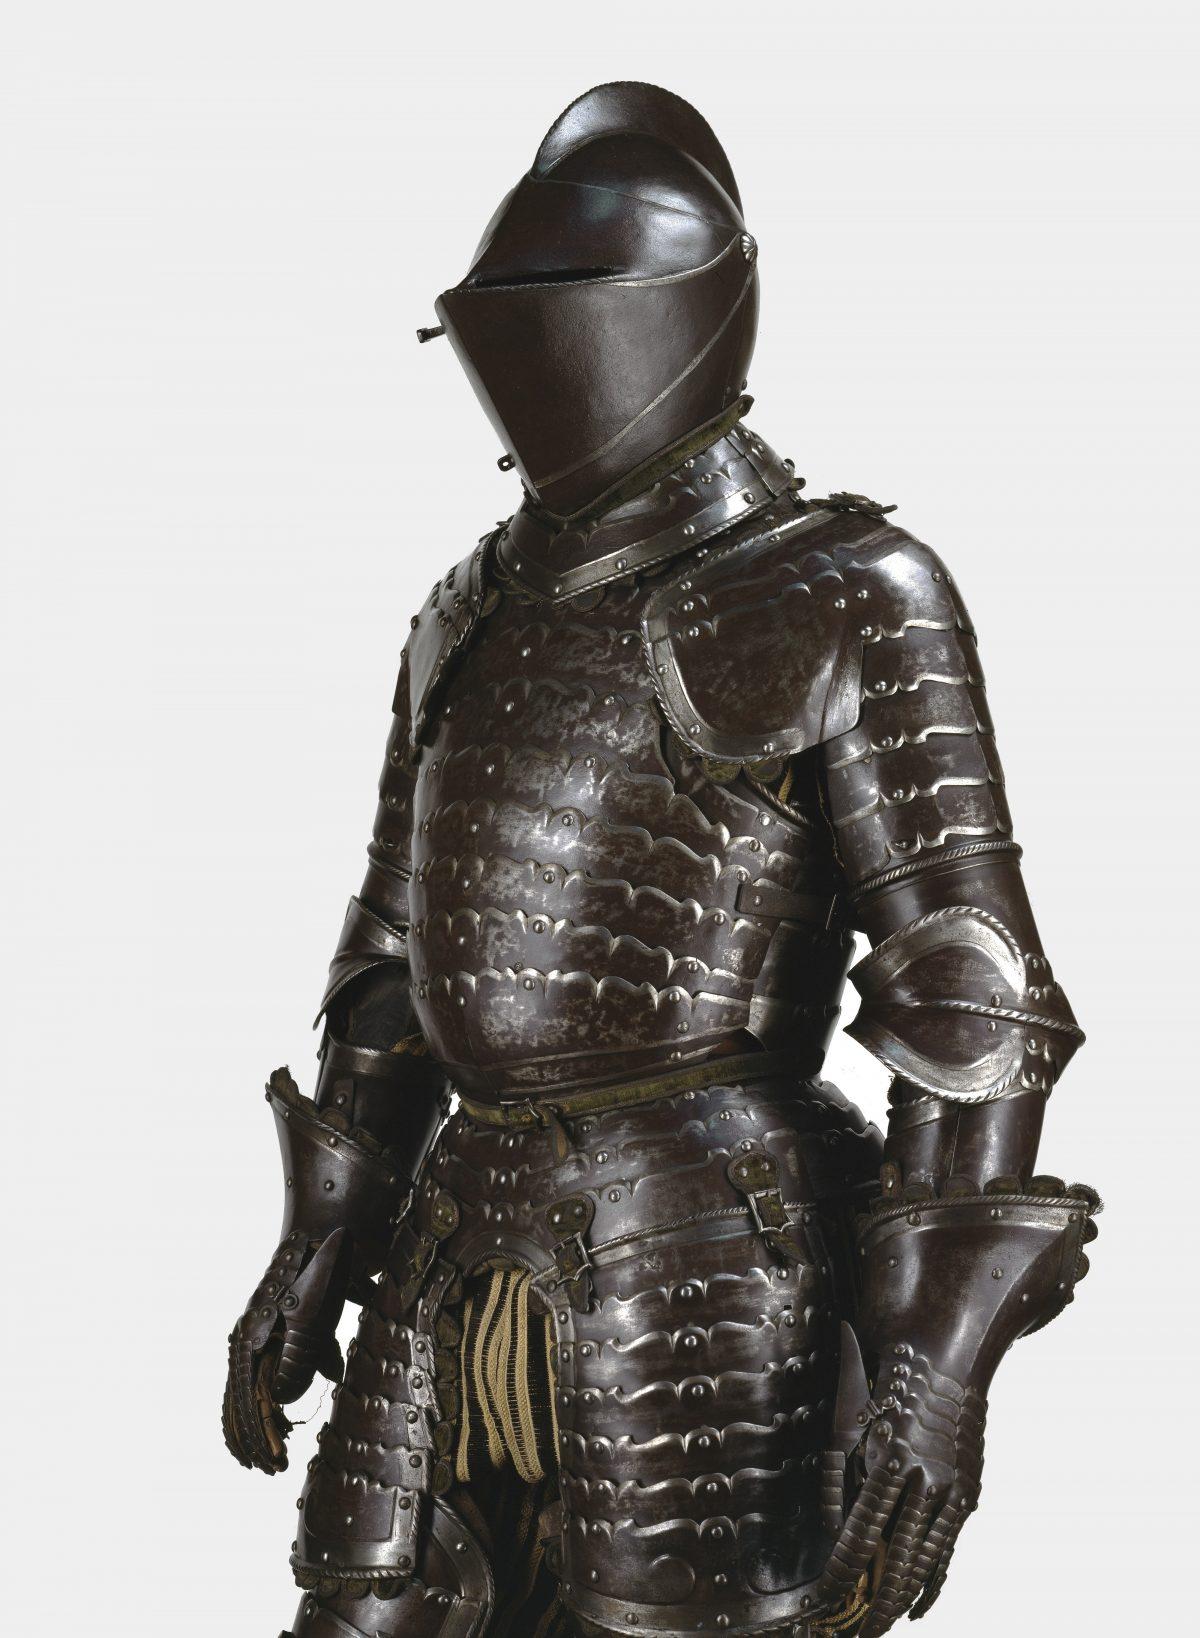 Suit of armor, 1540–1550, Italian manufacture, Lombardy. Steel, leather, fabric, wood; 74 13/16 inches by 29 1/2 inches by 19 11/16 inches. Stibbert Museum, Florence. (The John and Mable Ringling Museum of Art)